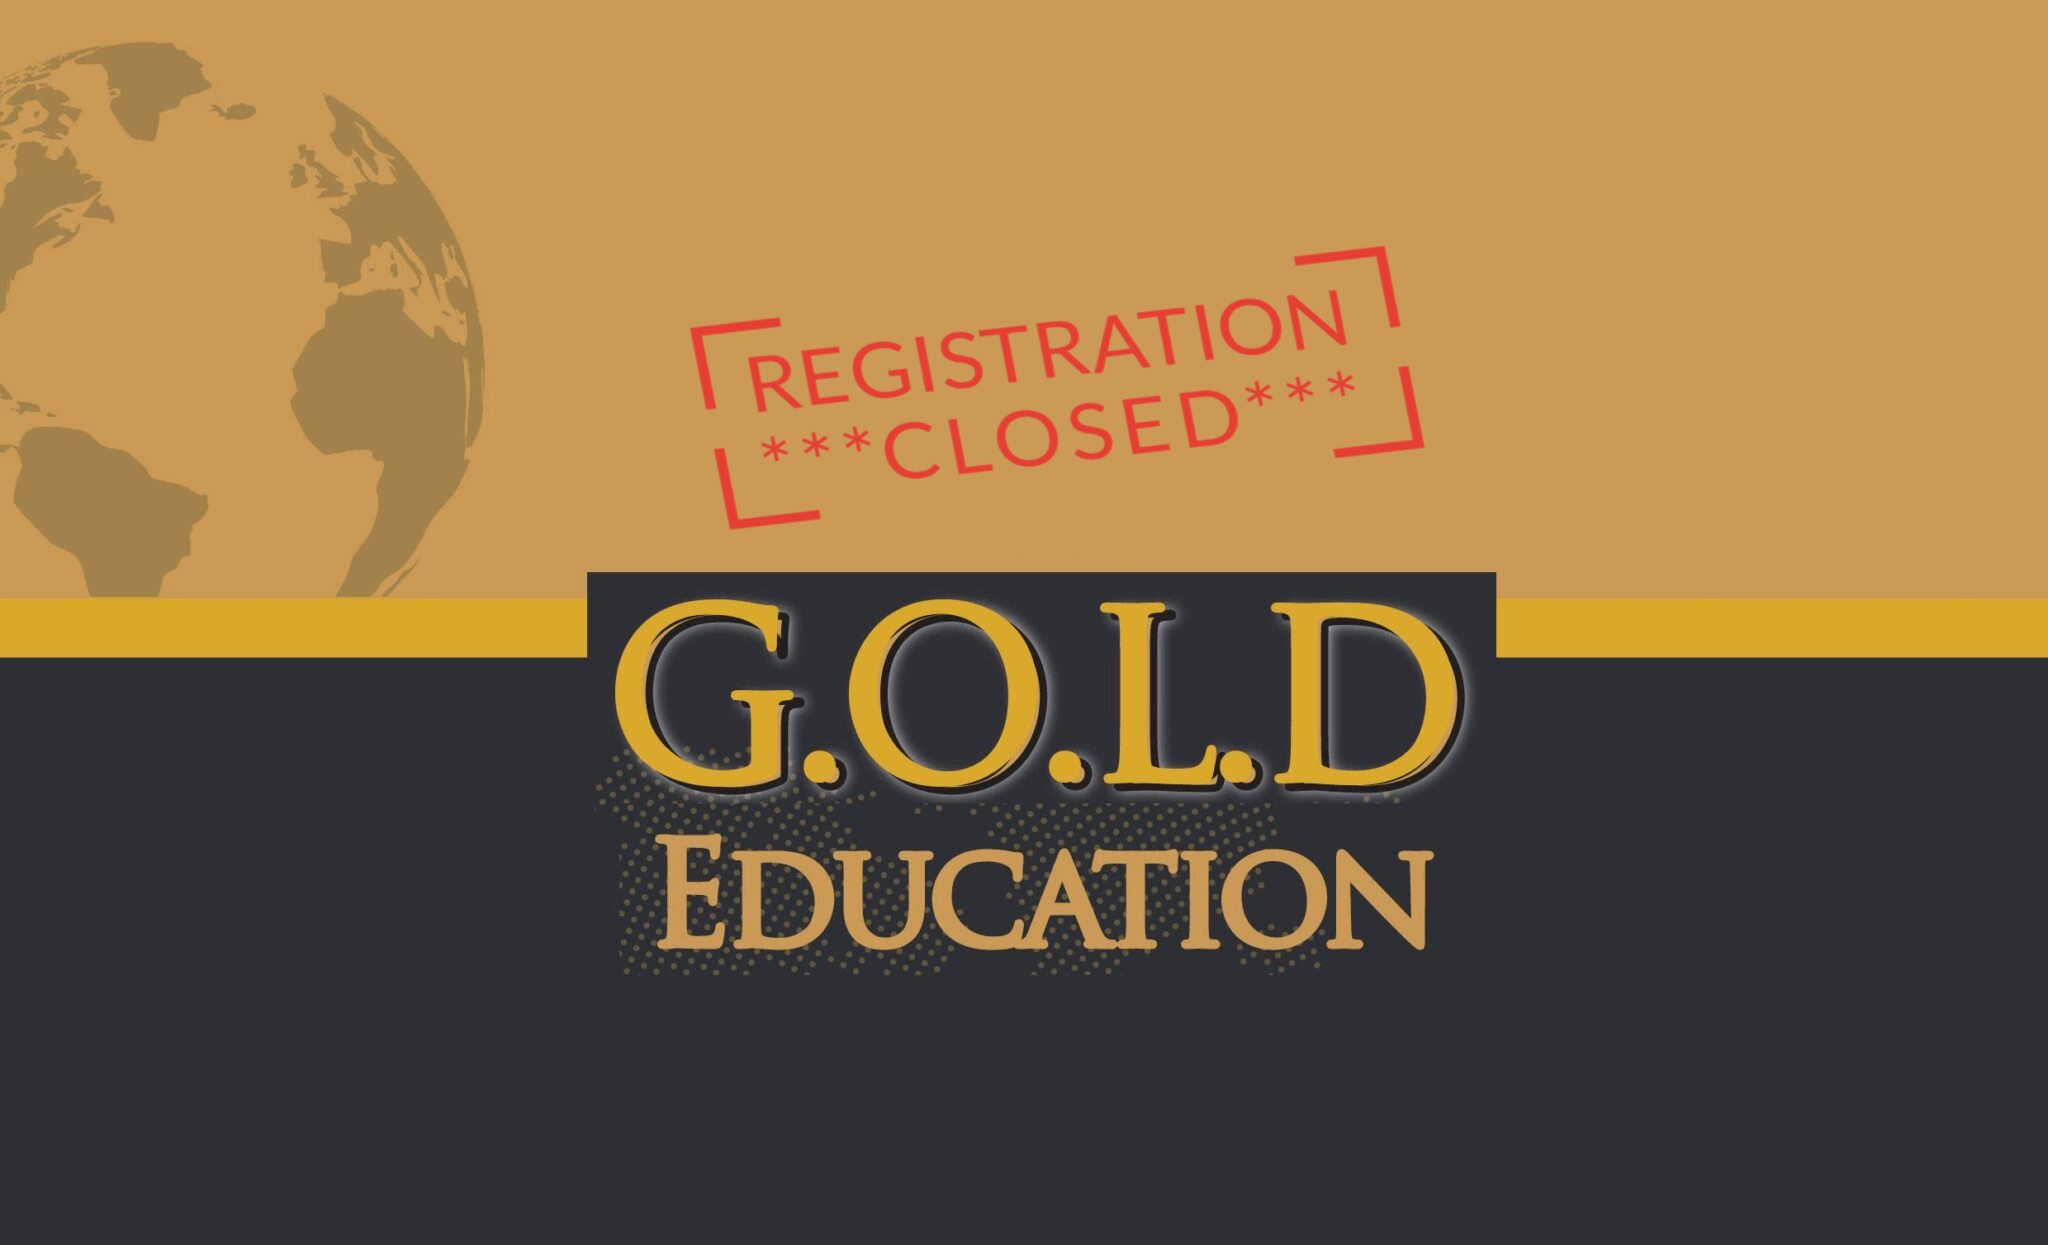 gold-featured-registration-closed